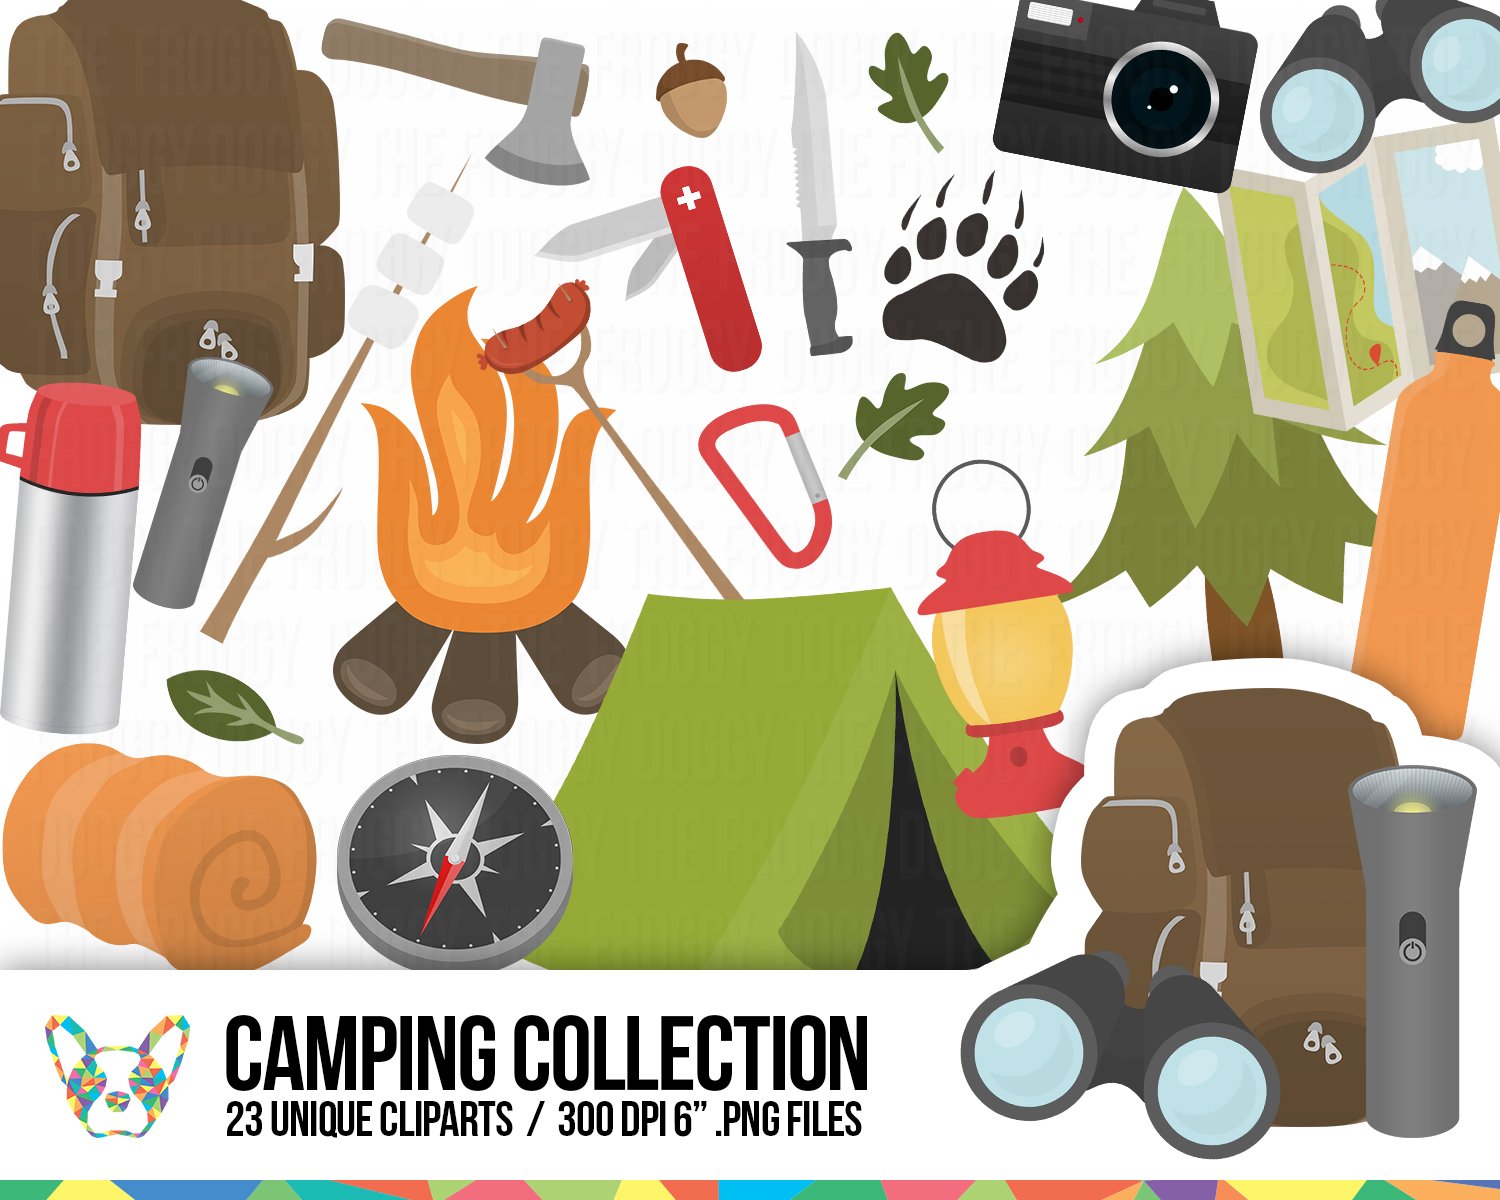 Camping Clipart Set cover image.